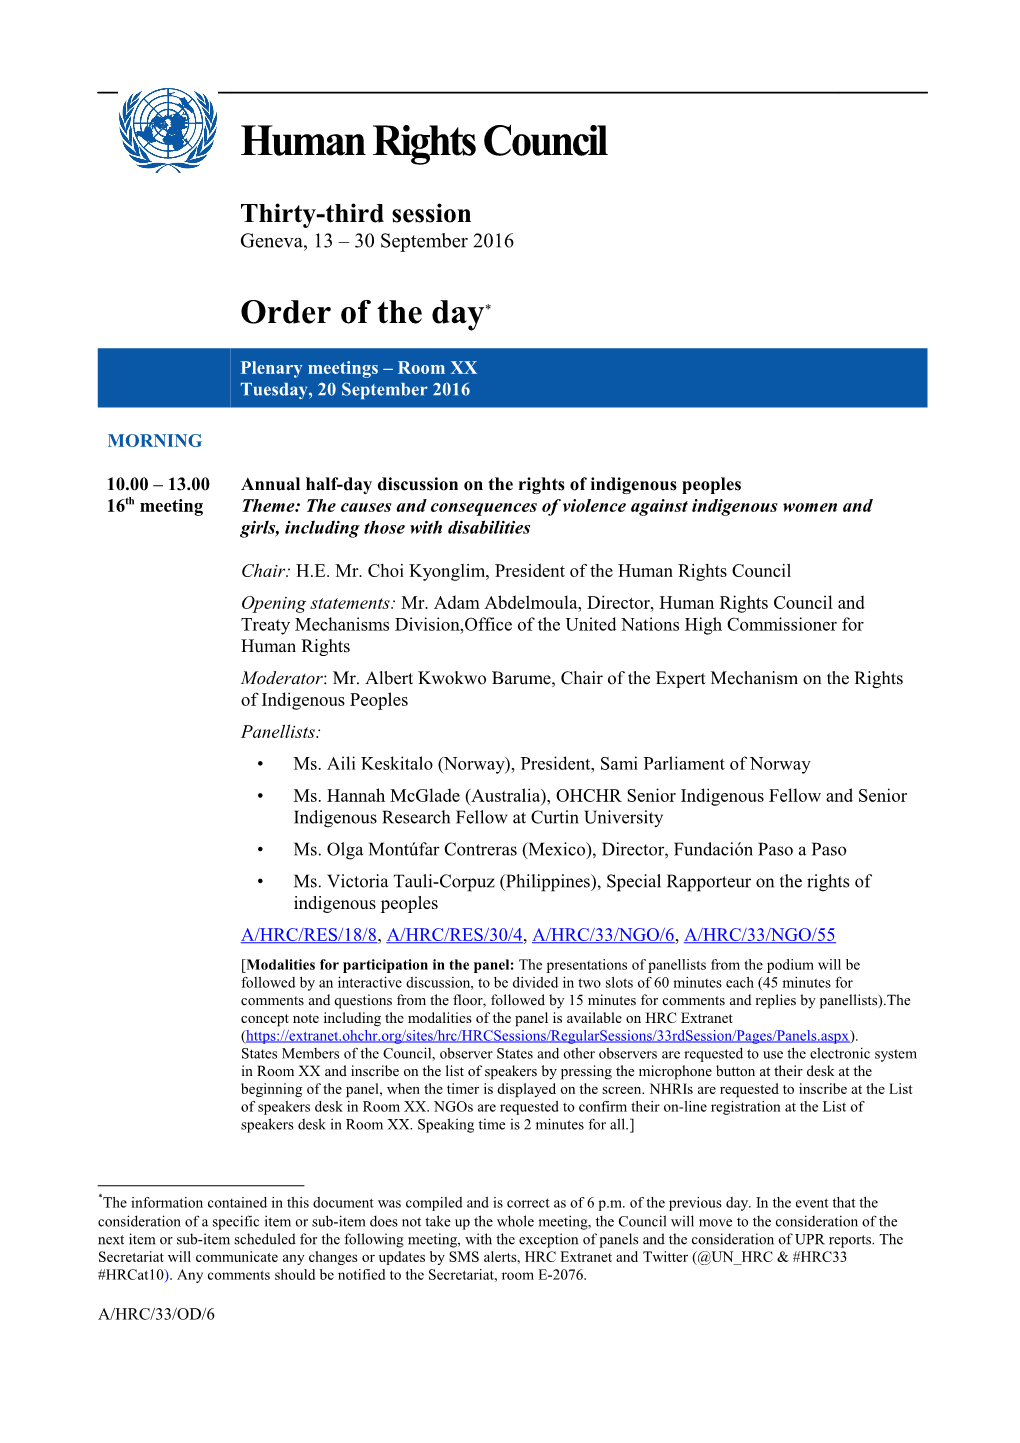 Tuesday, 20 September 2016, Order of the Day